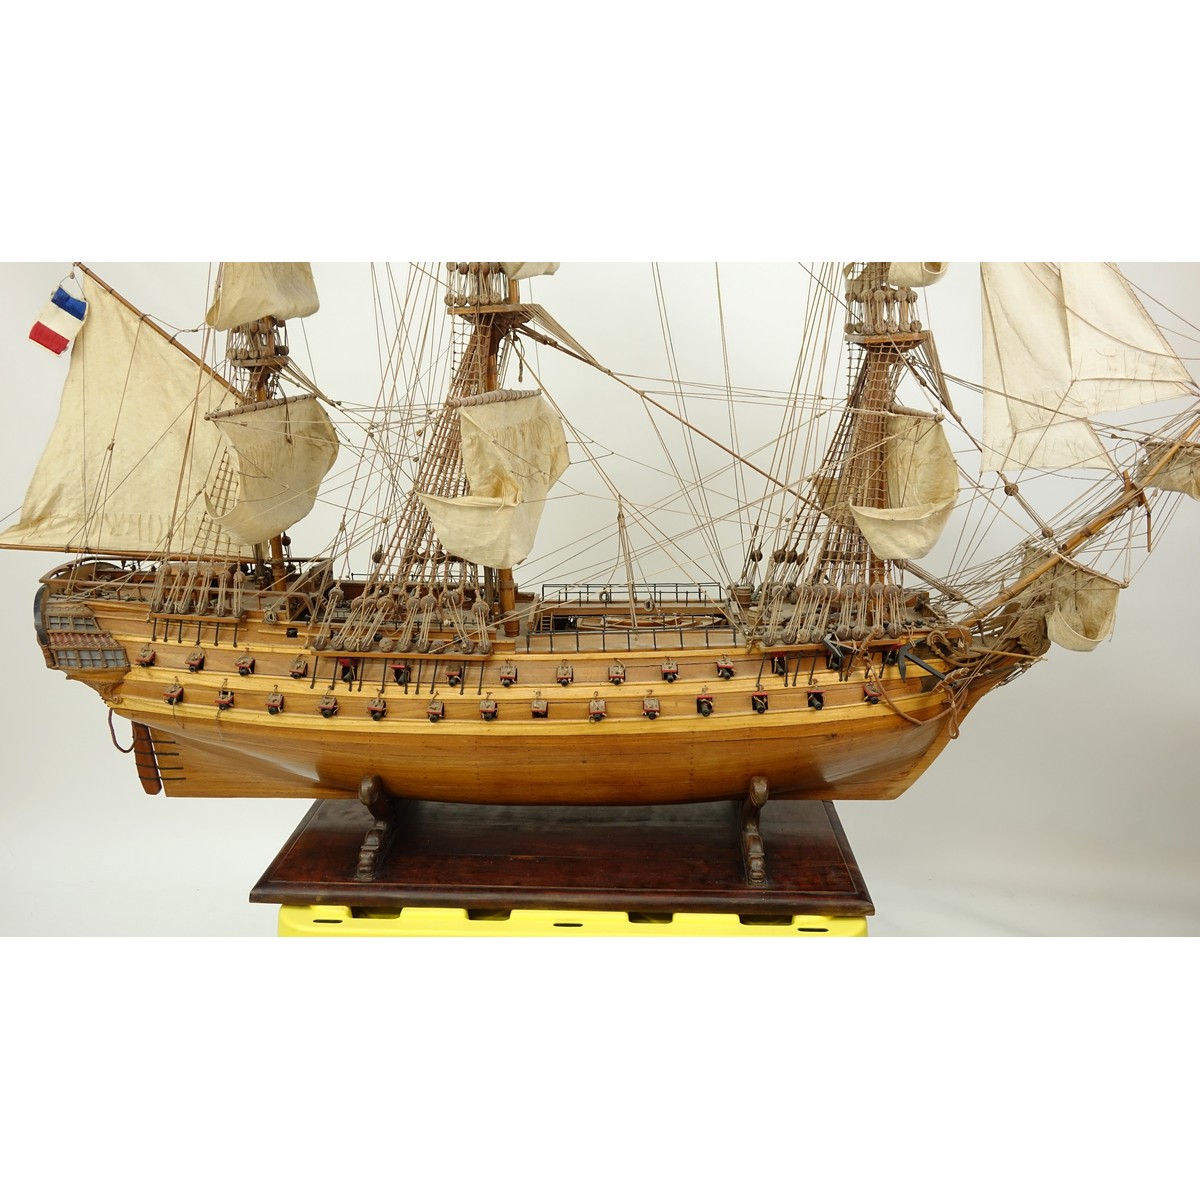 Antique French Wood Model Sailing Ship On Figural Stand. Well done and extremely detailed.